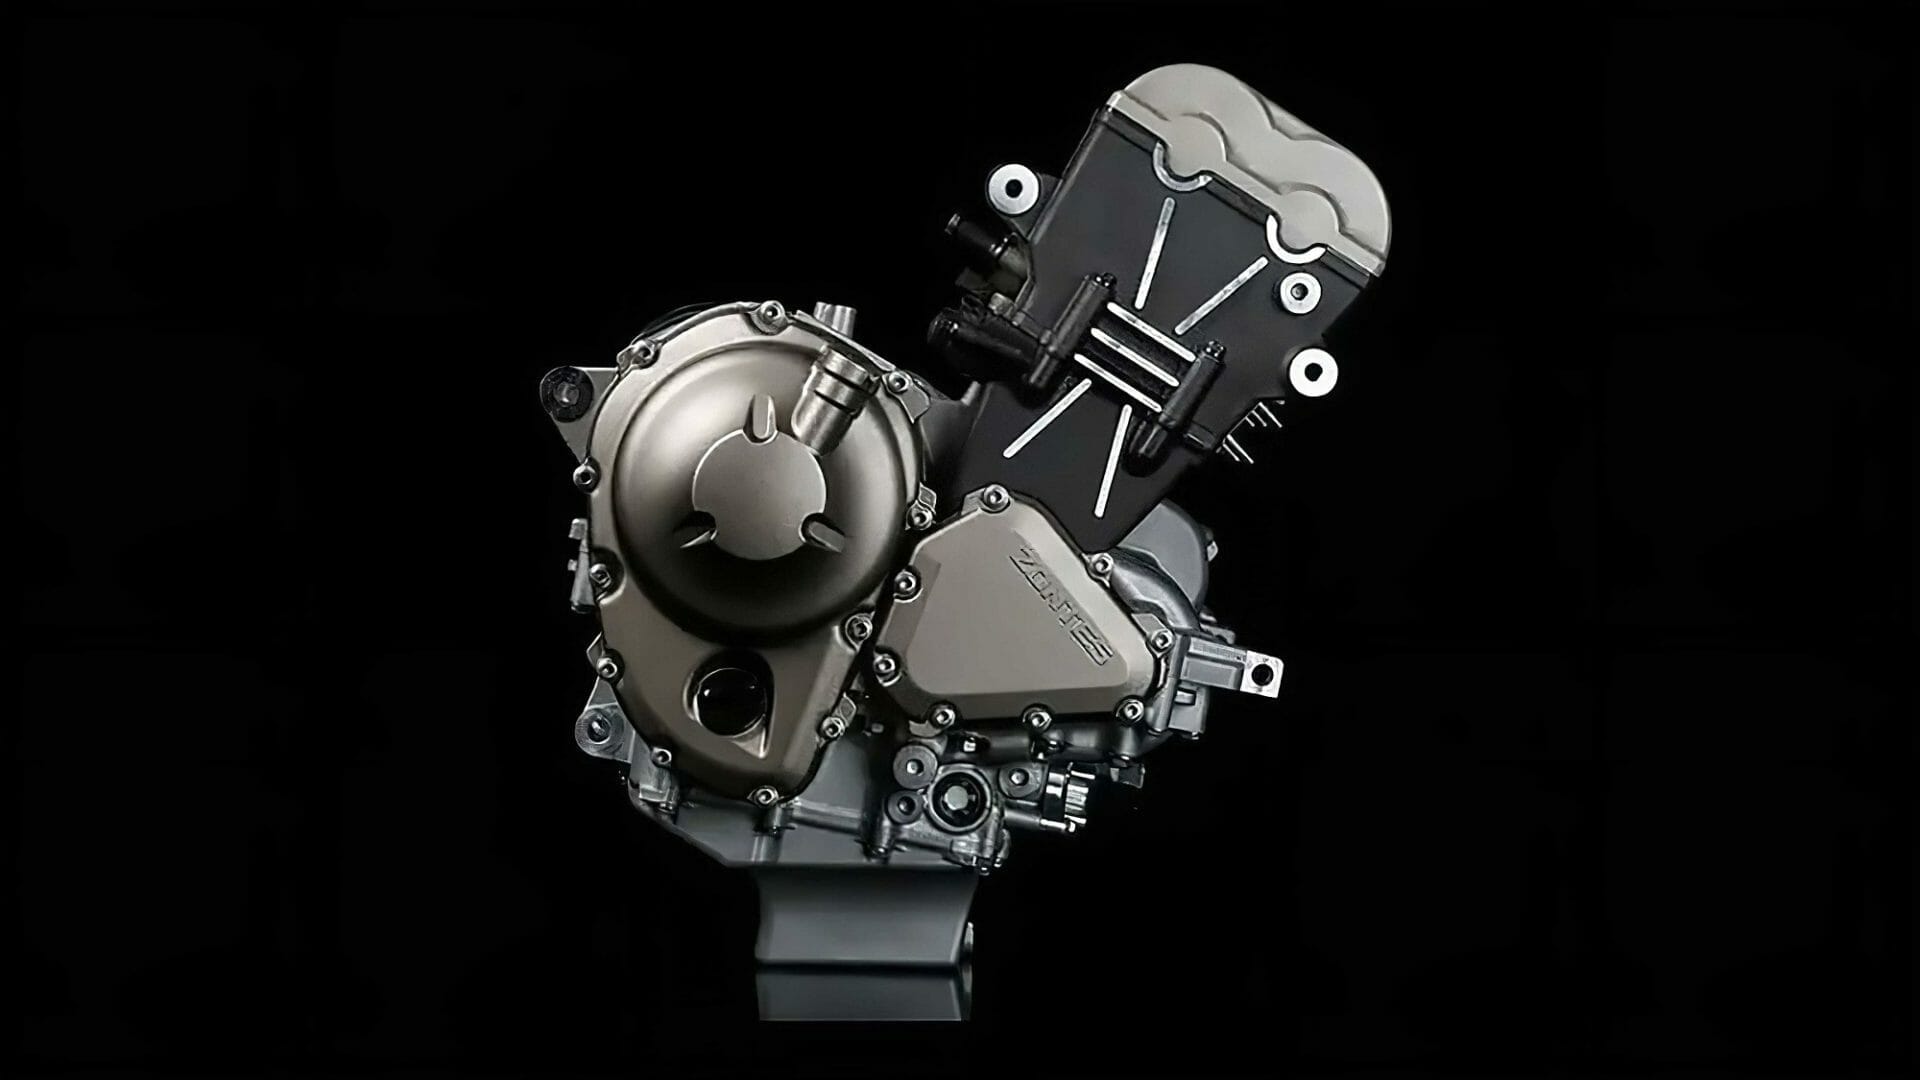 New three-cylinder from Zontes
- also in the MOTORCYCLES.NEWS APP